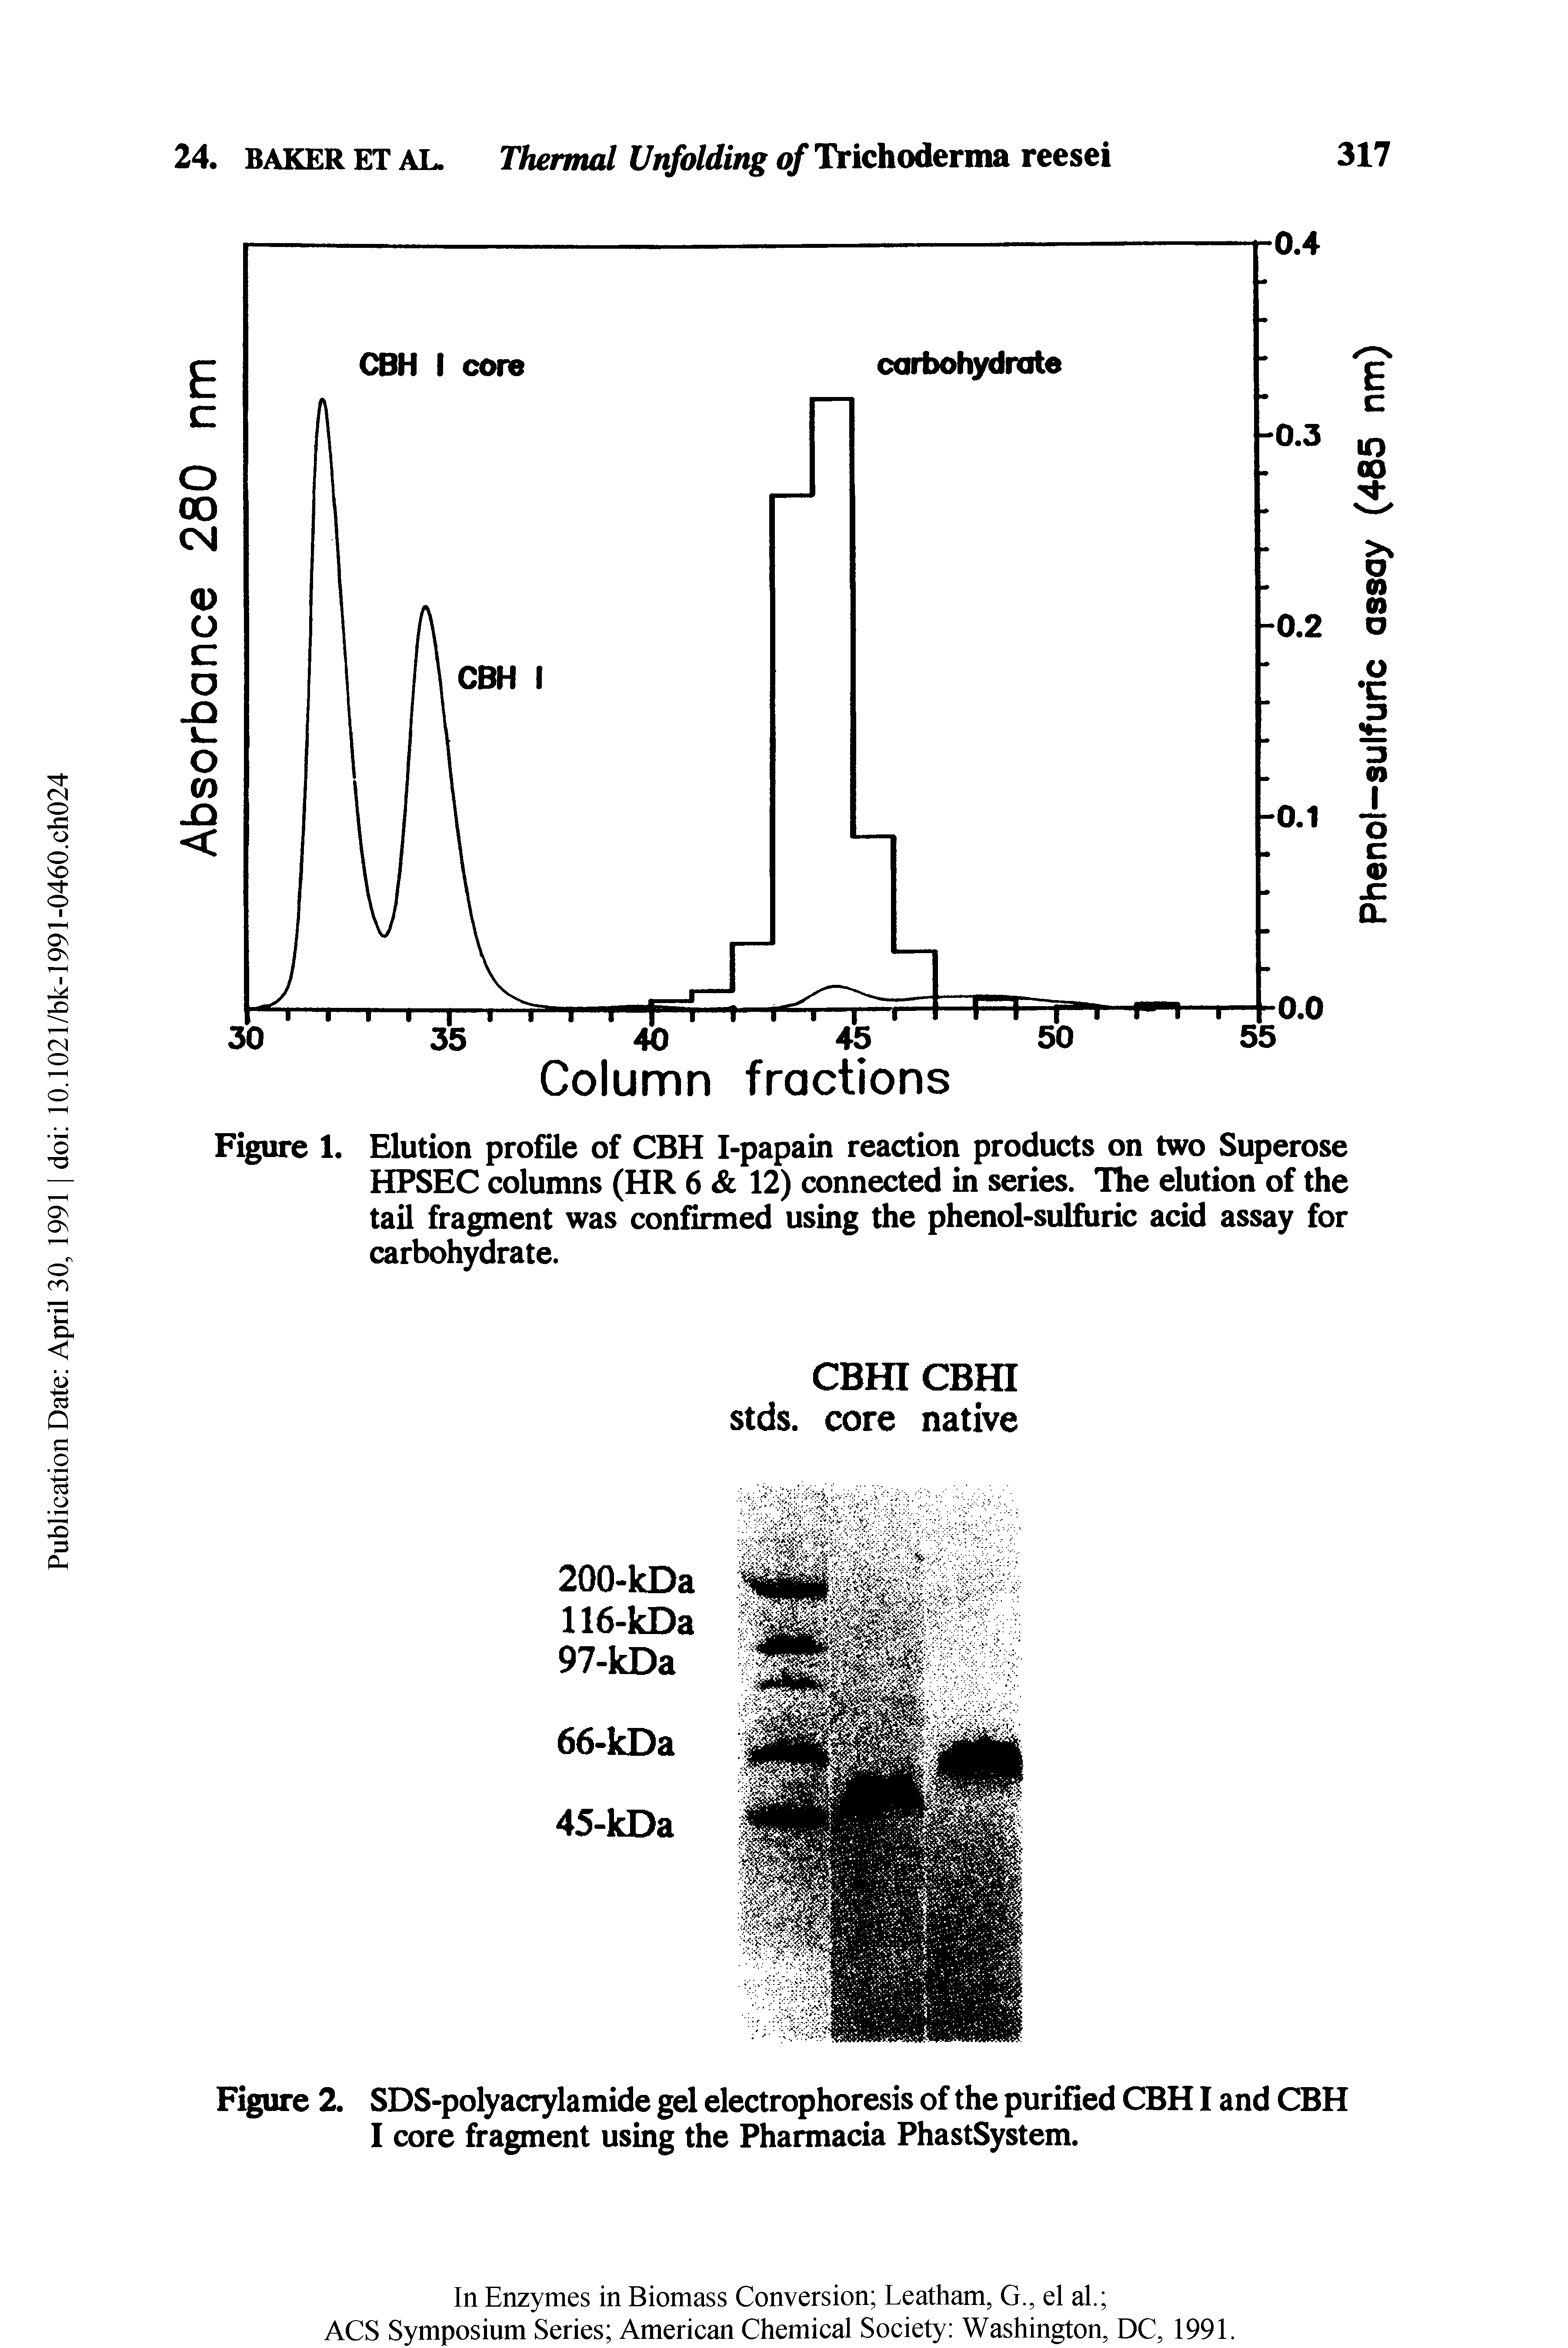 Figure 1. Elution profile of CBH I-papain reaction products on two Superose HPSEC columns (HR 6 12) connected in series. Ilte elution of the tail fragment was confirmed using the phenol-sulfiiric acid assay for carbohydrate.